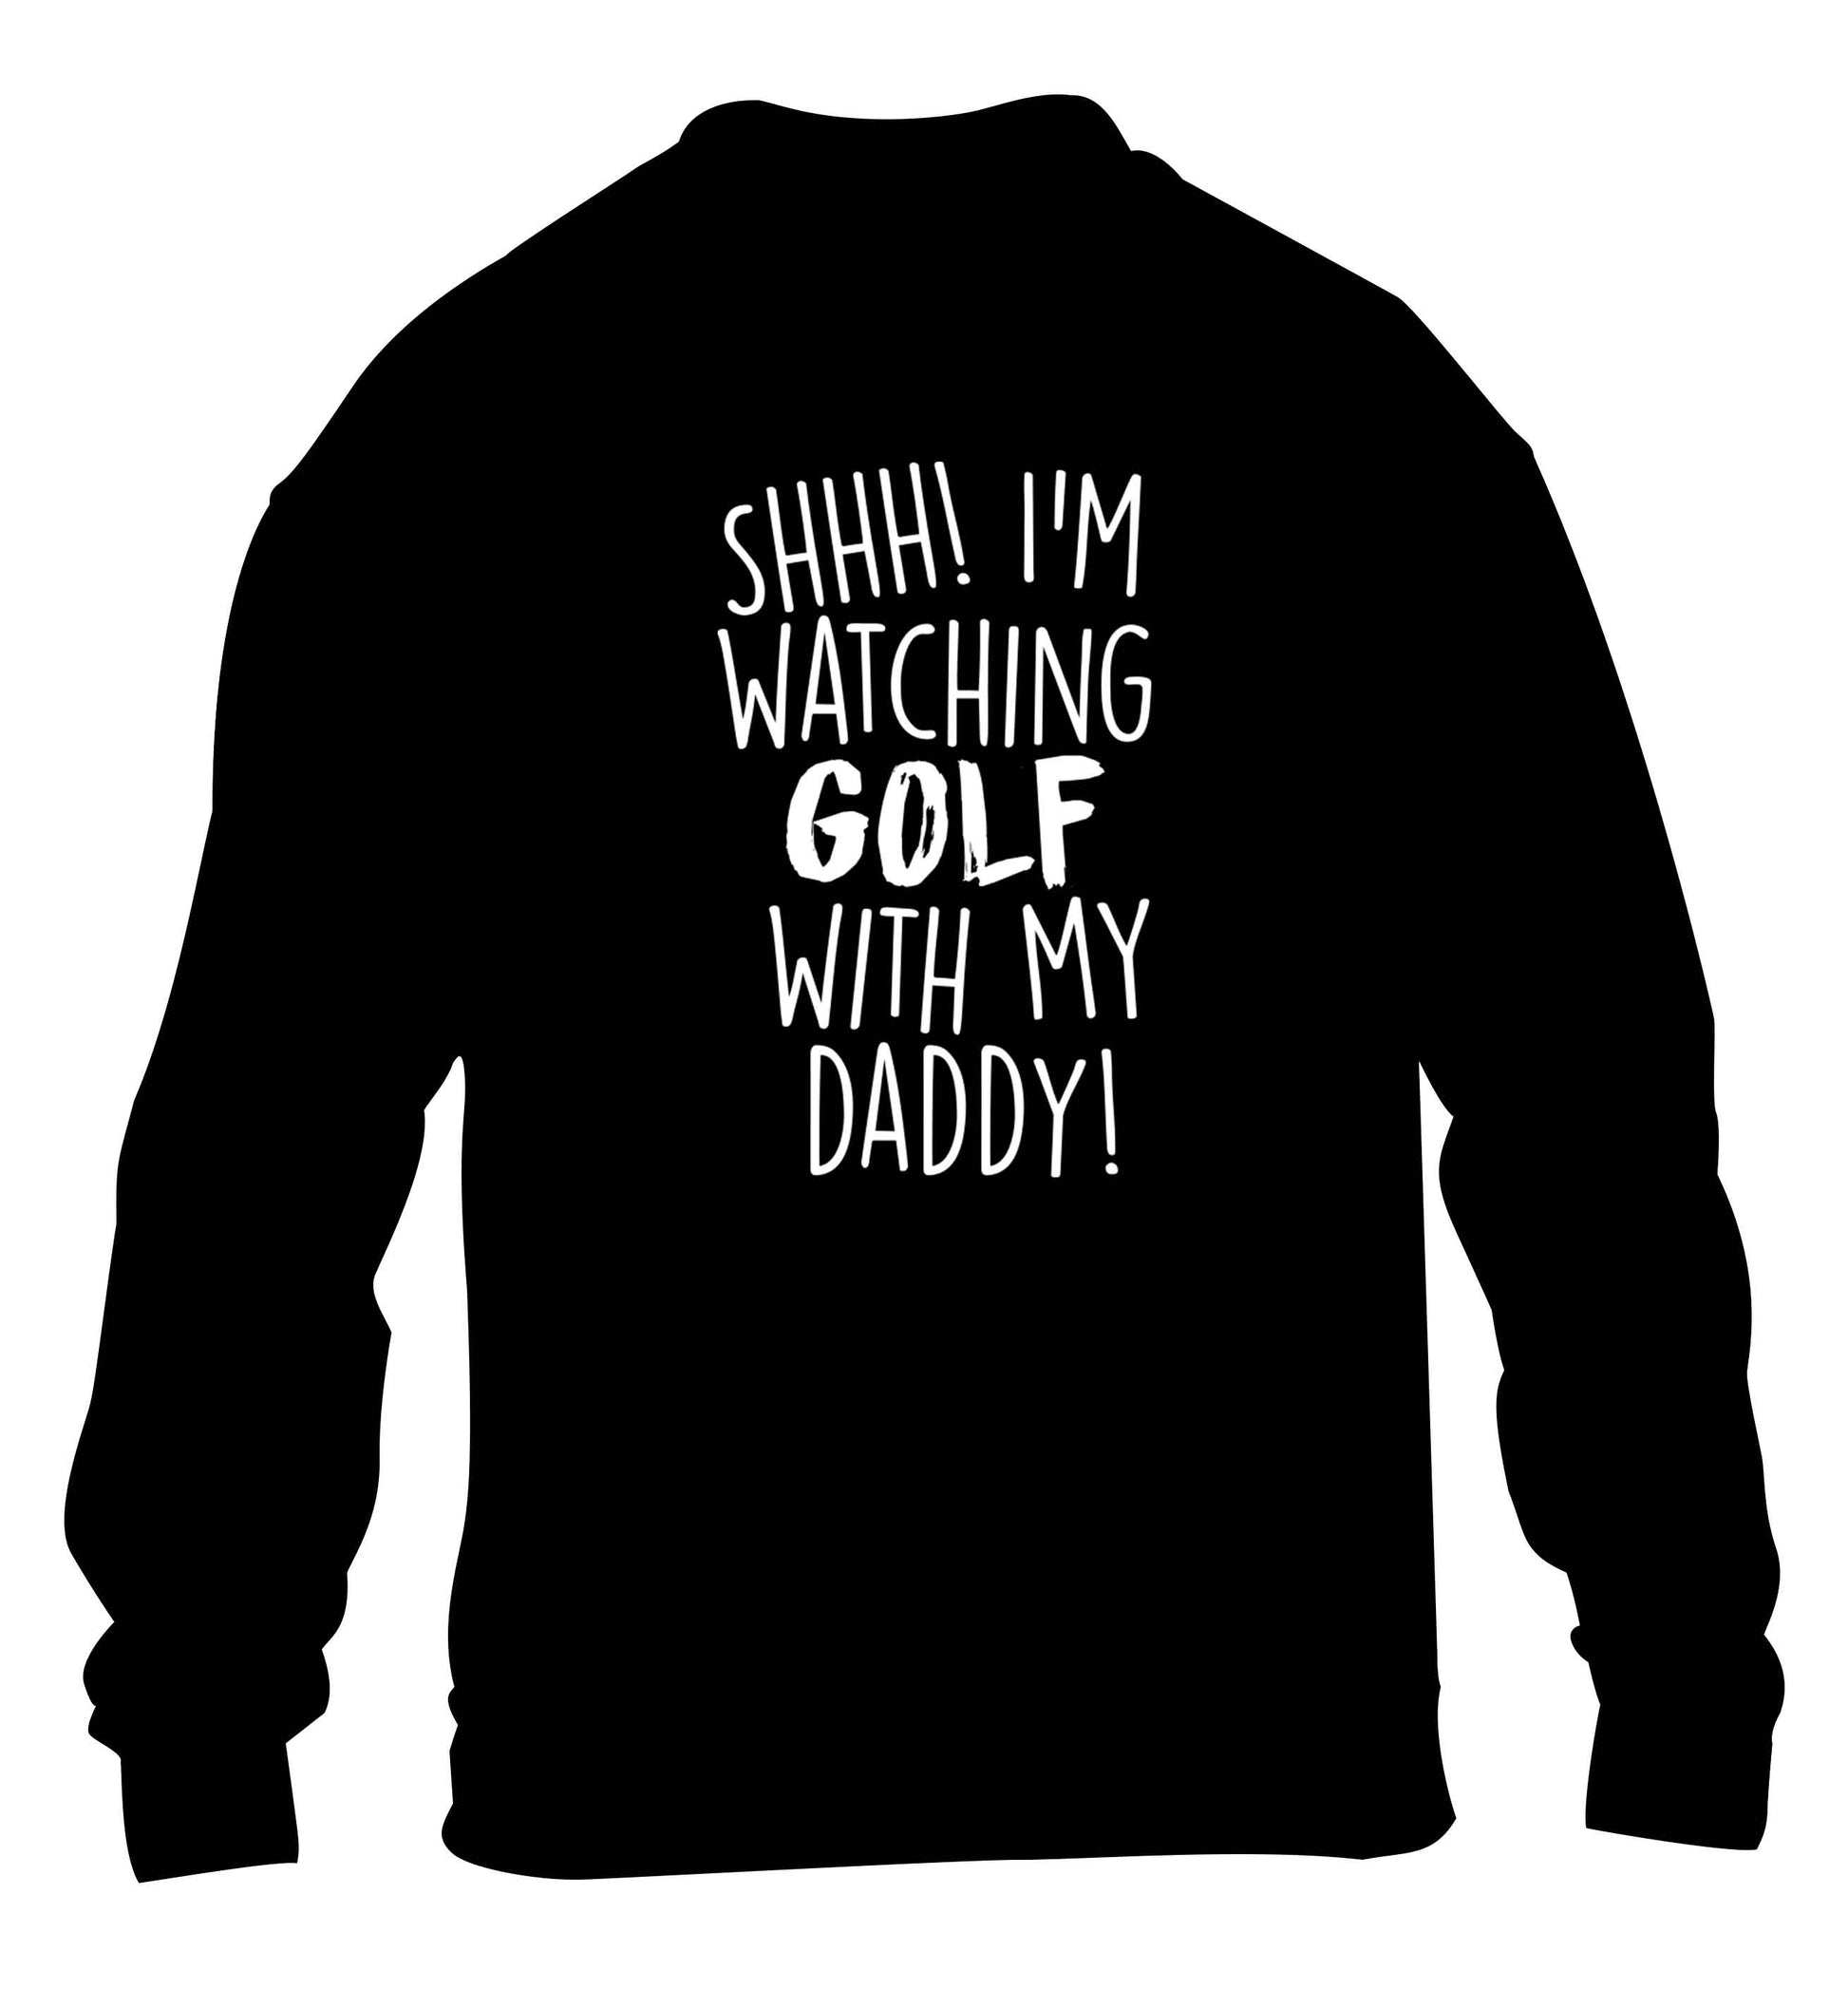 Shh I'm watching golf with my daddy children's black sweater 12-13 Years